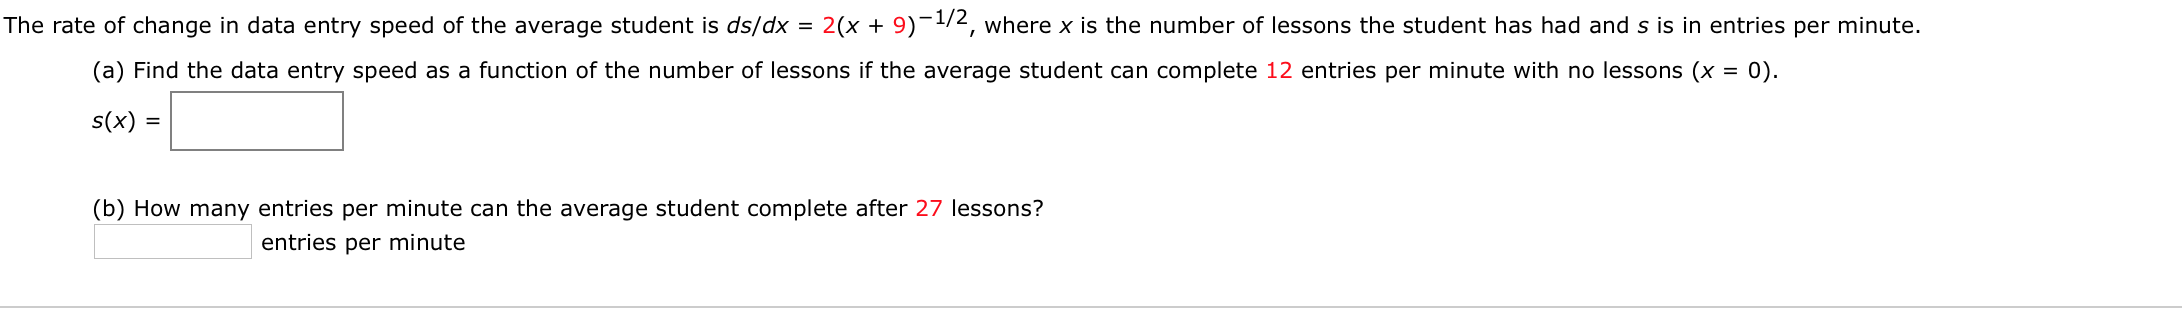 The rate of change in data entry speed of the average student is ds/dx = 2(x + 9)¬1/2, where x is the number of lessons the student has had and s is in entries per minute.
%3D
(a) Find the data entry speed as a function of the number of lessons if the average student can complete 12 entries per minute with no lessons (x = 0).
%3D
s(x) =
(b) How many entries per minute can the average student complete after 27 lessons?
entries per minute
